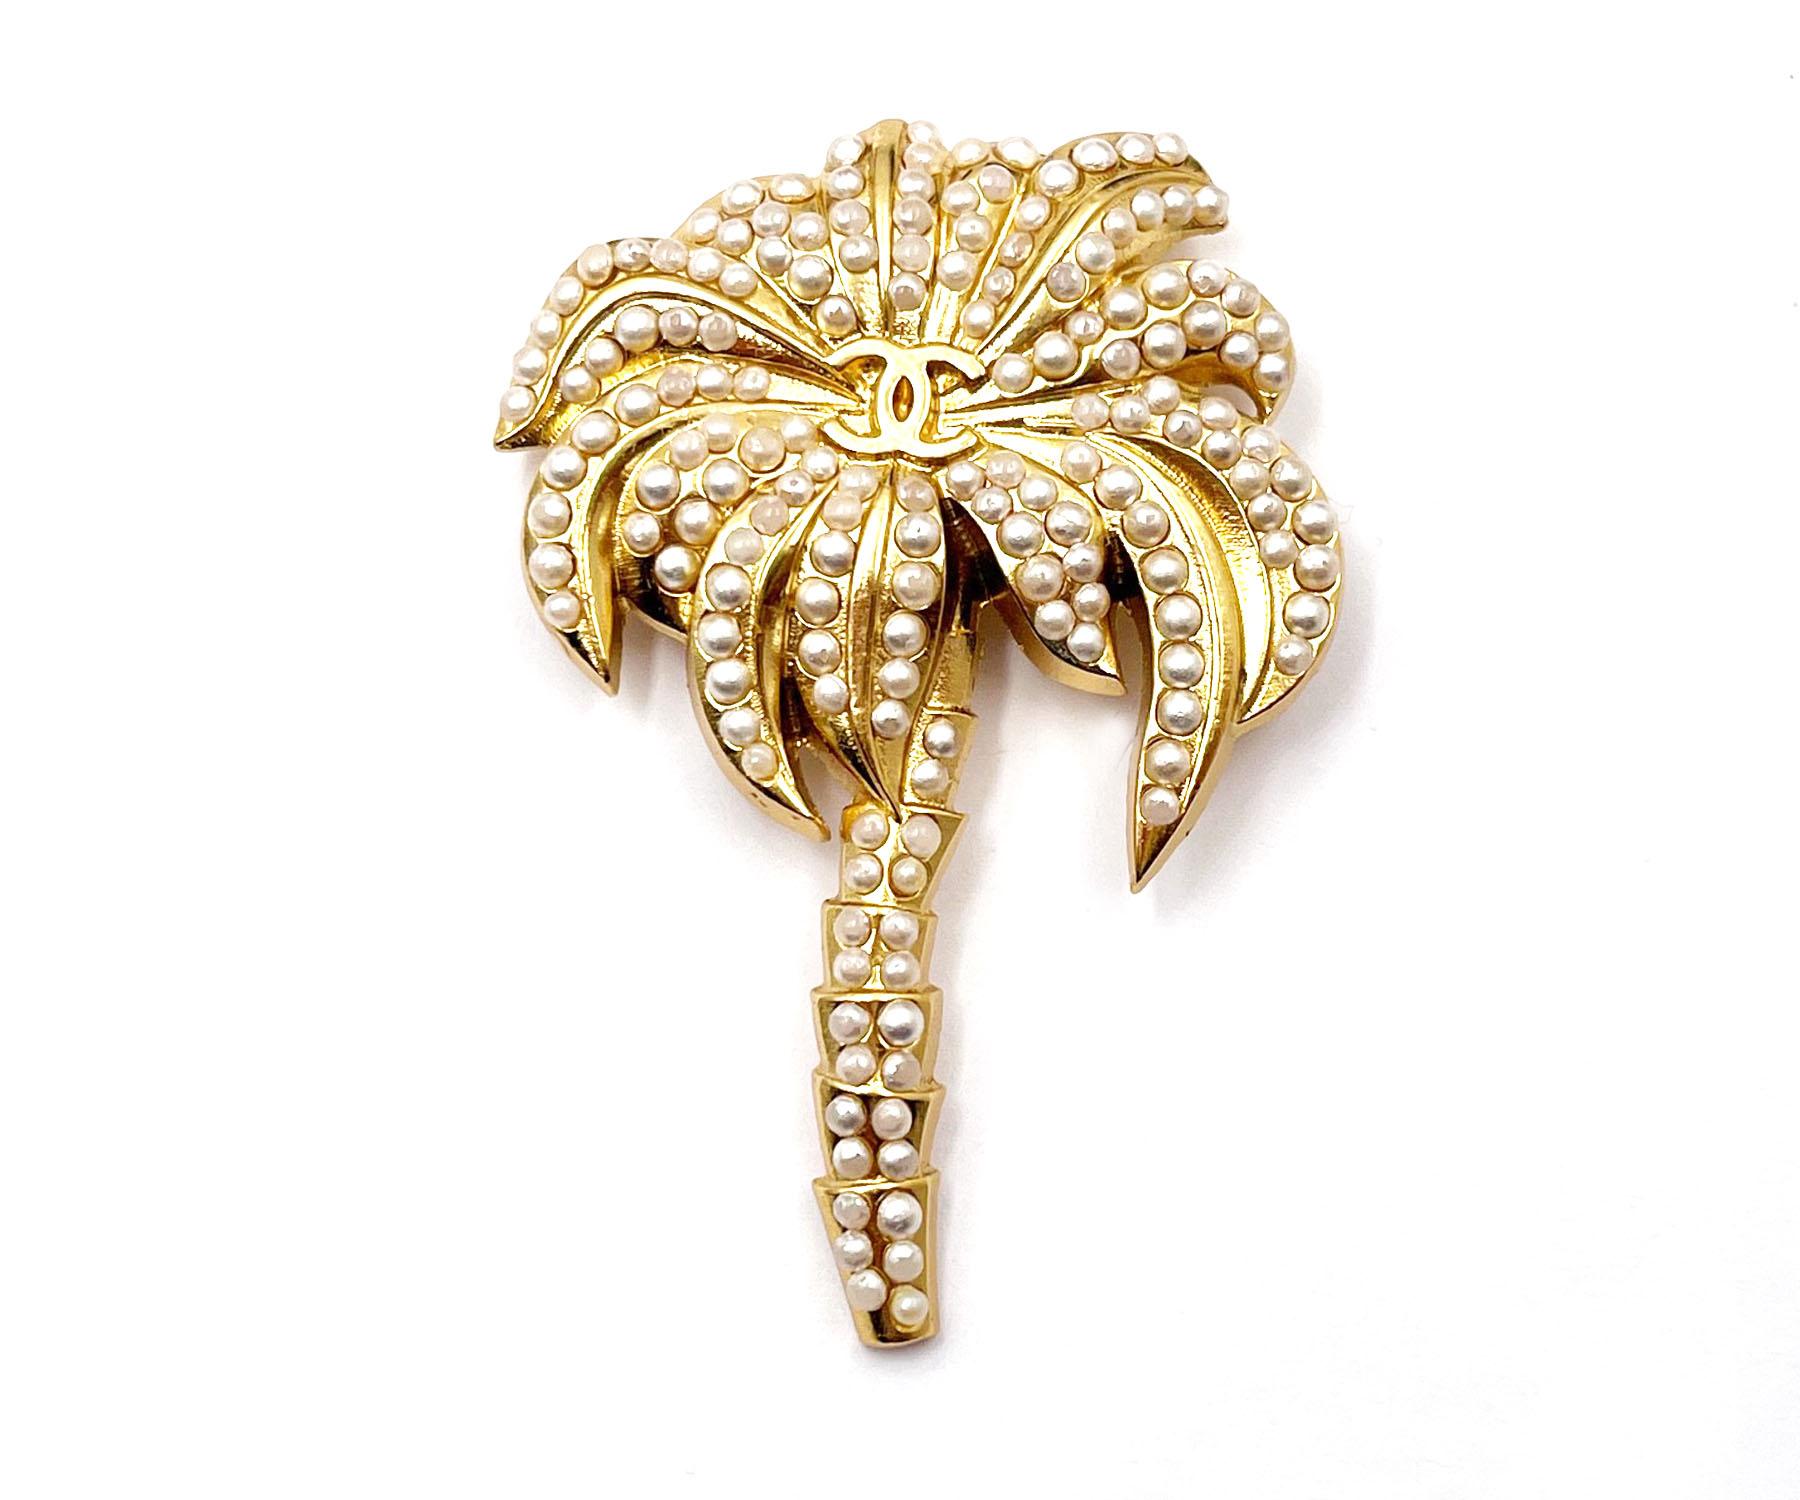 Chanel Vintage Gold Plated CC Seed Pearl Palm Tree Large Brooch

*Marked 02
*Made in France
*Comes with the original box

- It is approximately 2.25